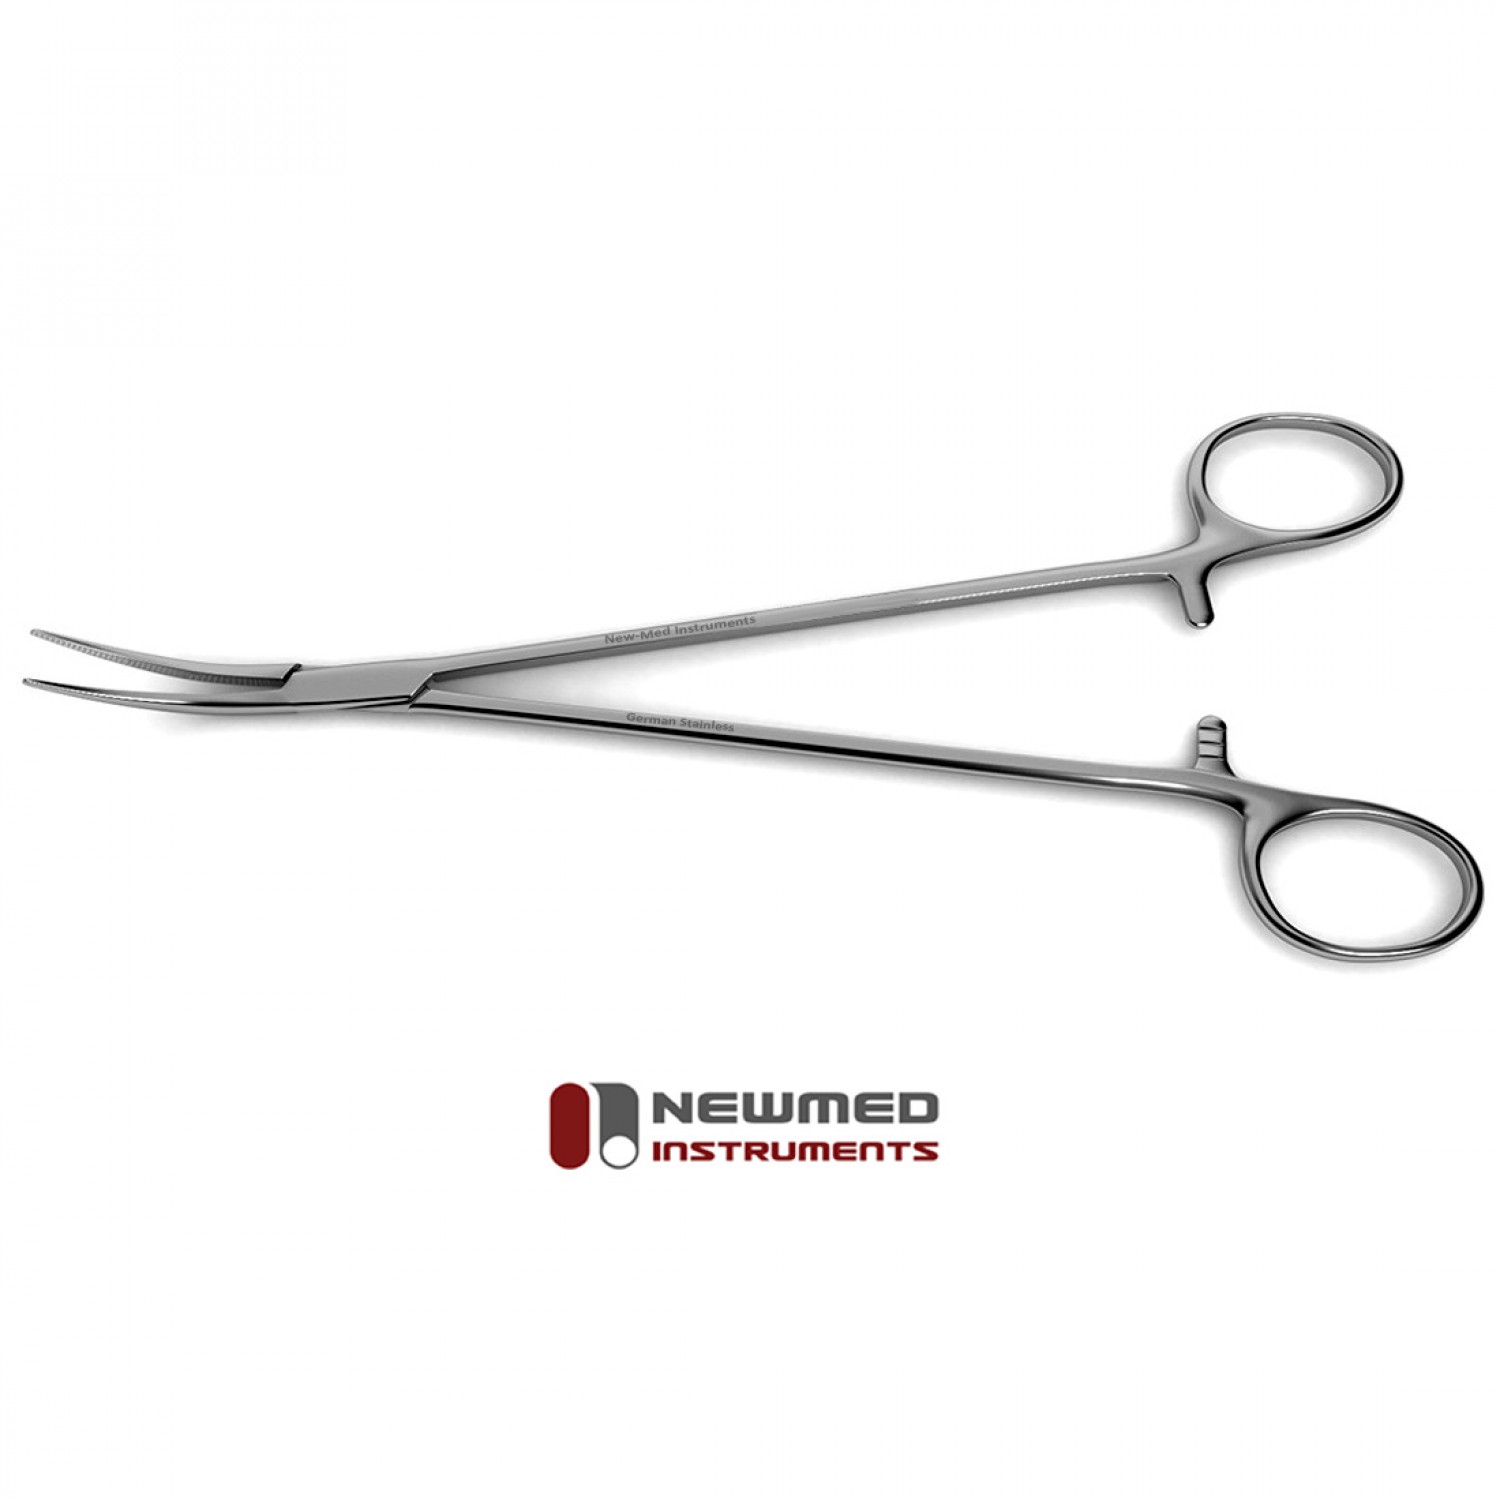 Mosquito Forceps  New Med Instruments